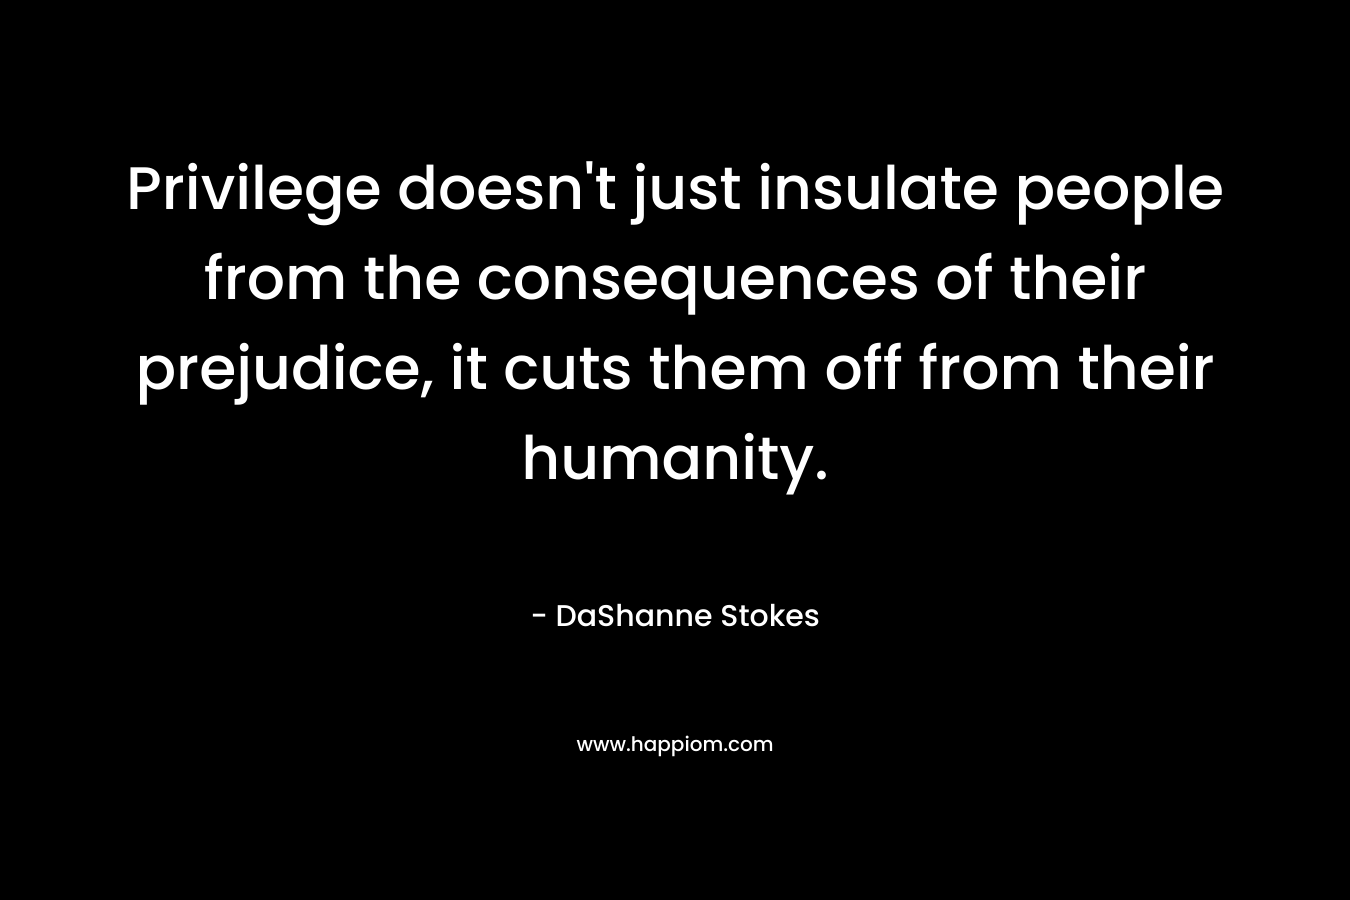 Privilege doesn't just insulate people from the consequences of their prejudice, it cuts them off from their humanity.